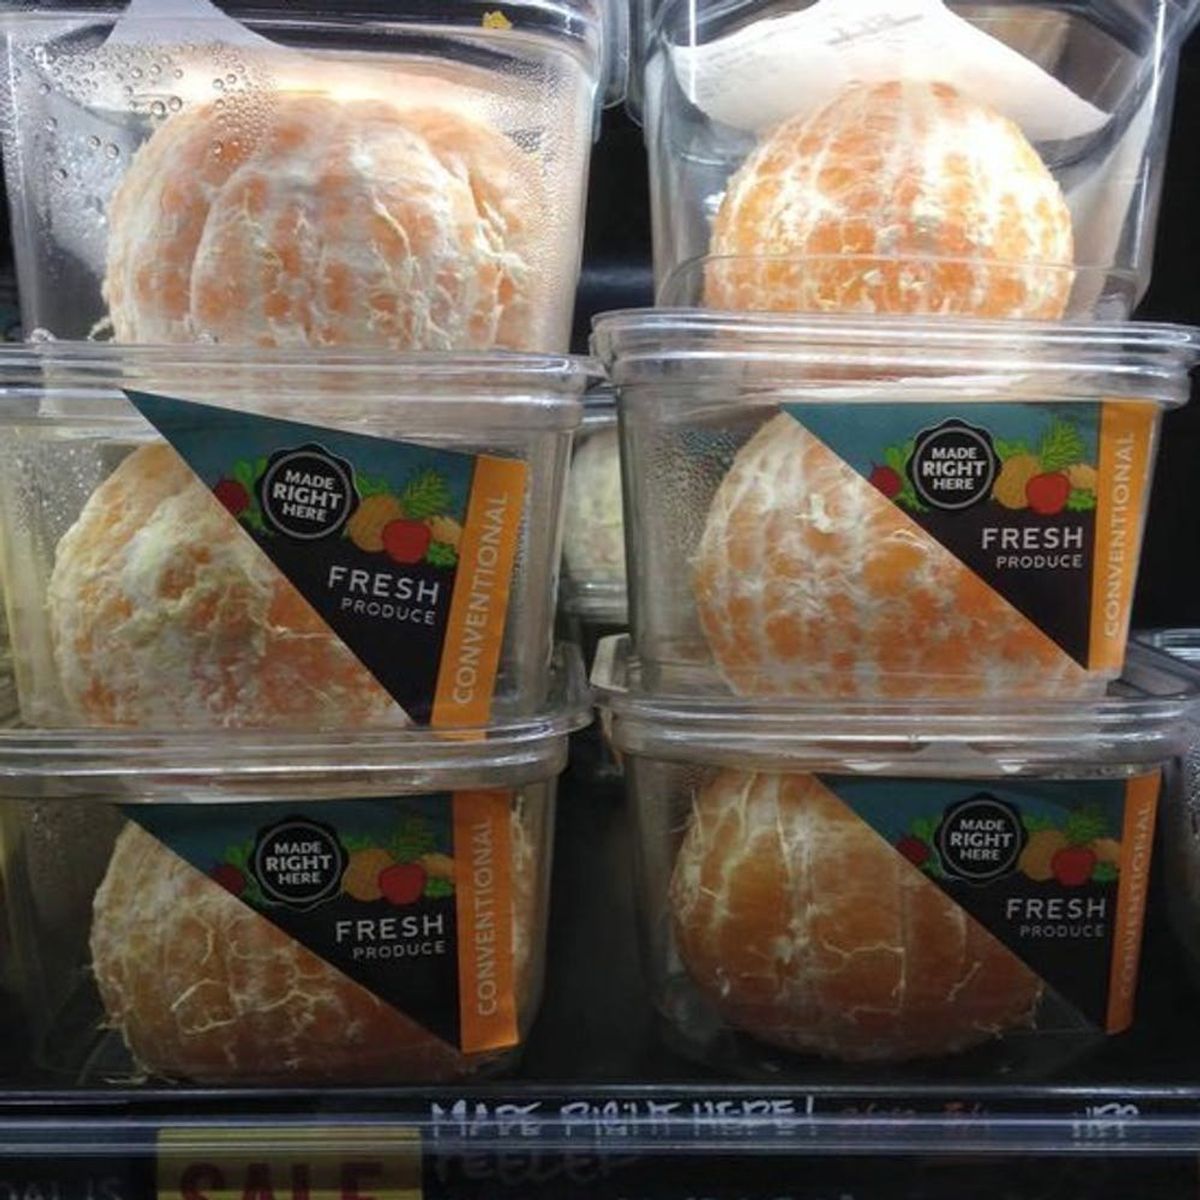 Whole Foods’ New Oranges Are the Ultimate SMH Shopping Moment